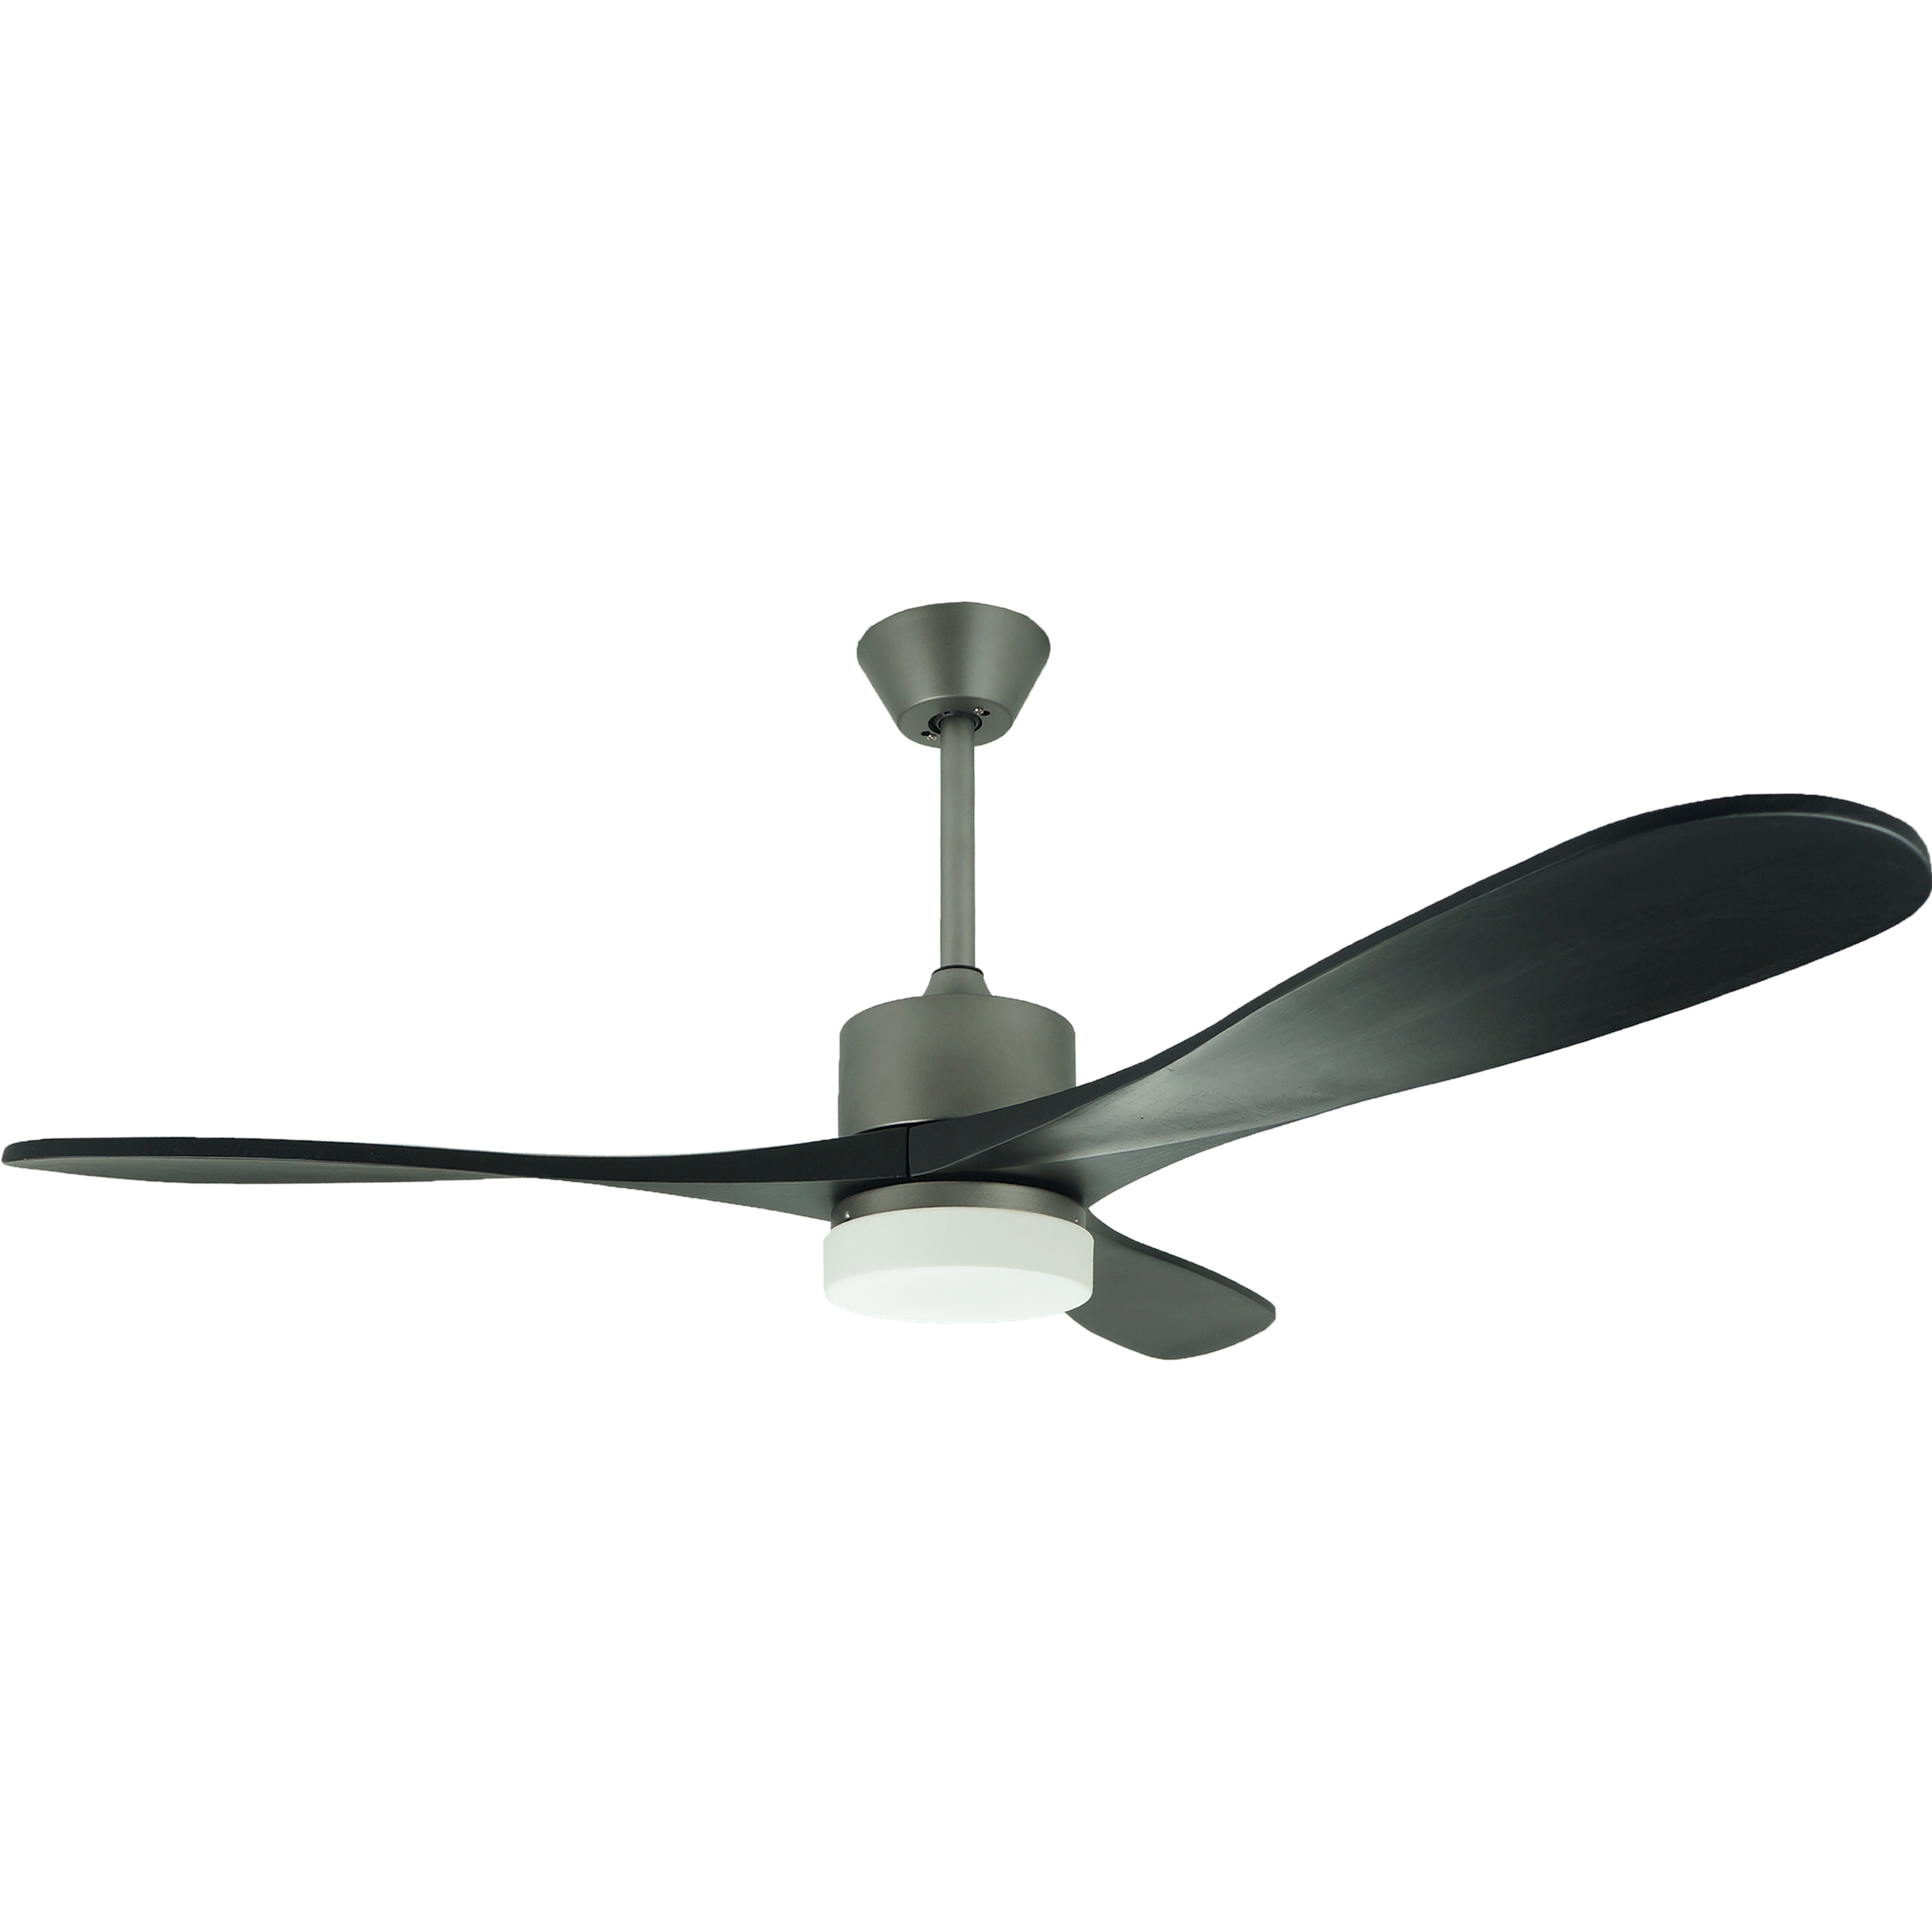 Airbena High-end Modern Home Style 52 Inch Gray Color Hot Sale Ceiling Fan Remote Control